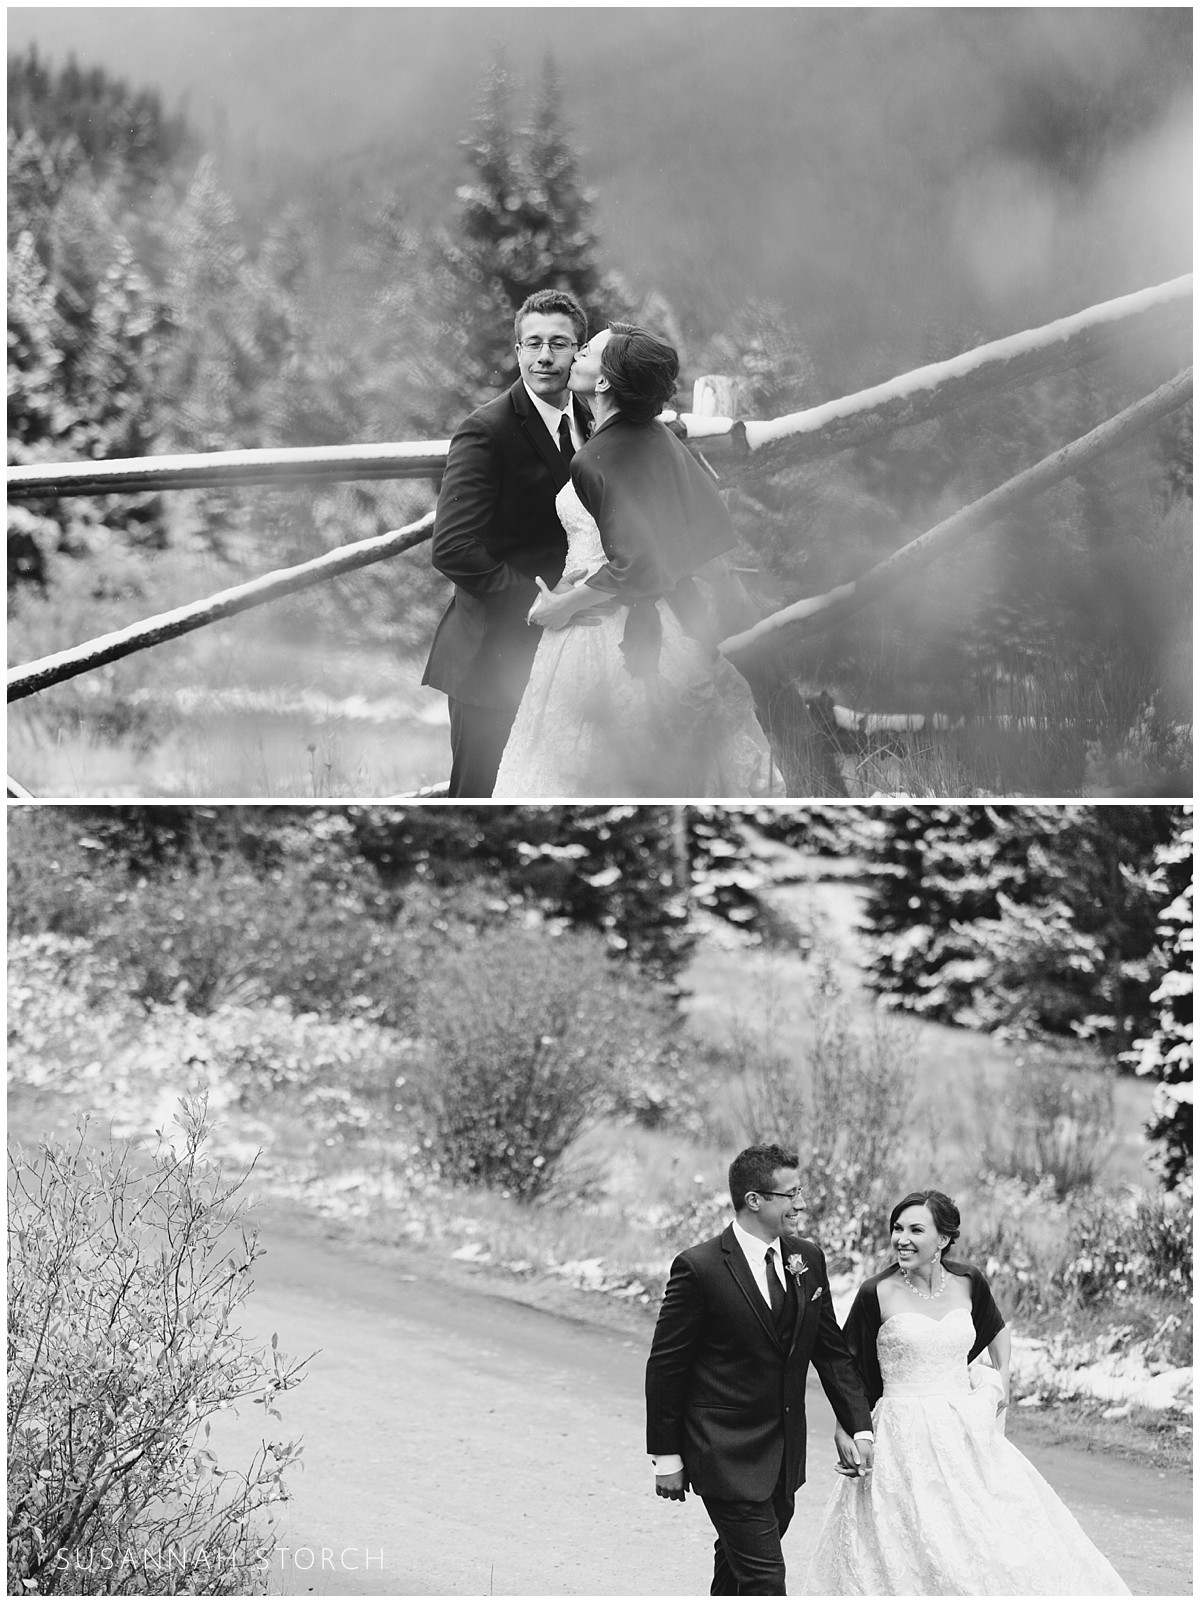 two black and white images of a mountain wedding couple